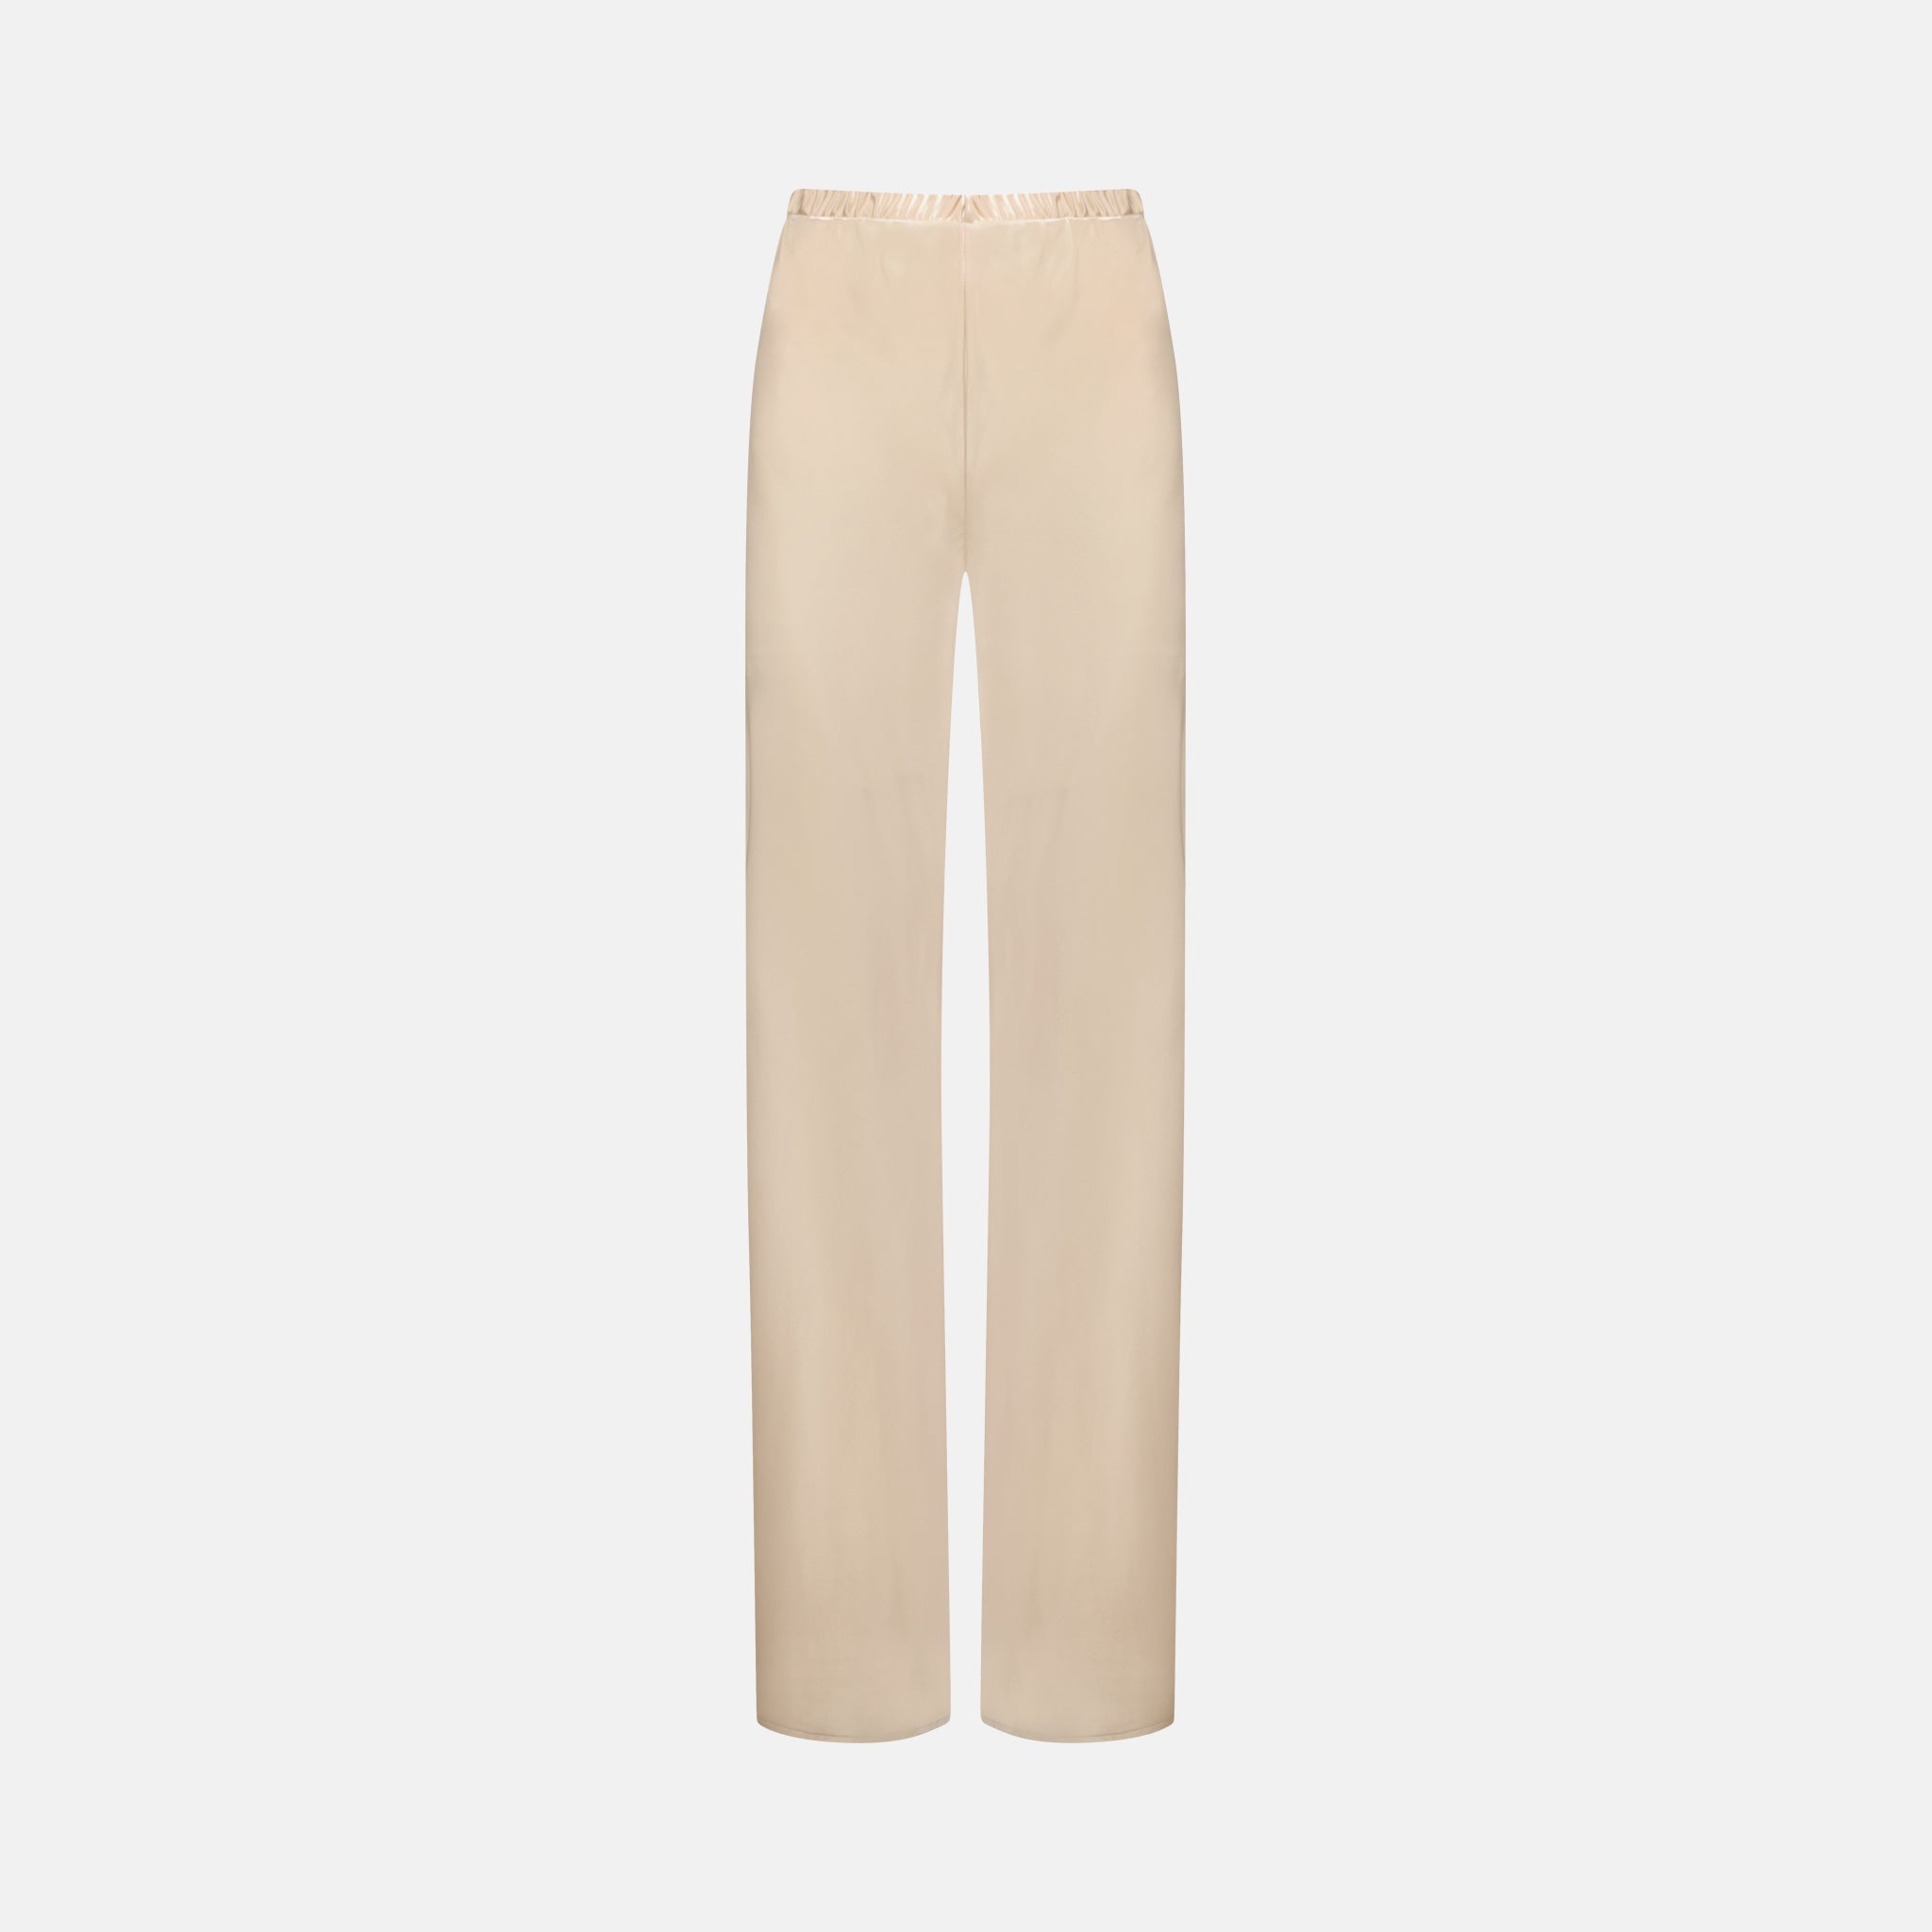 Ophelia Pant Prosecco Pink